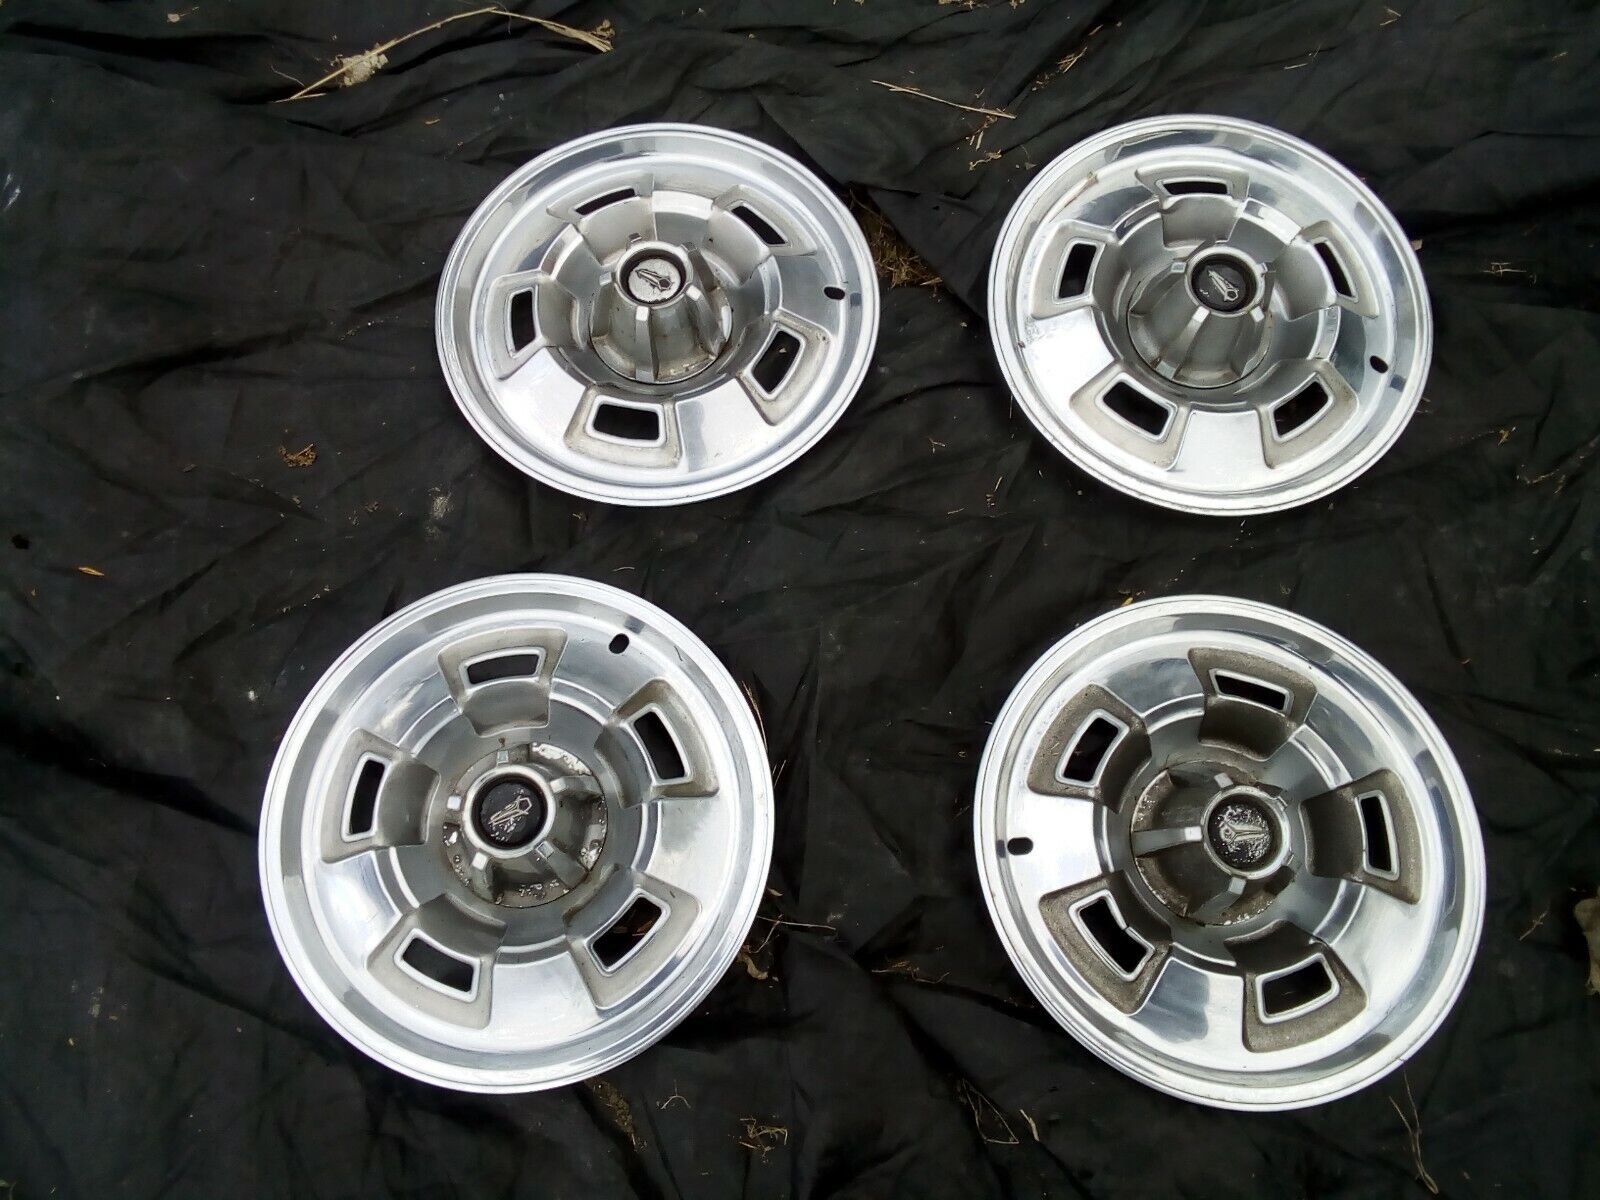 1967 to 1969 Plymouth Barracuda Belvedere 14 inch mag style hubcaps wheel covers